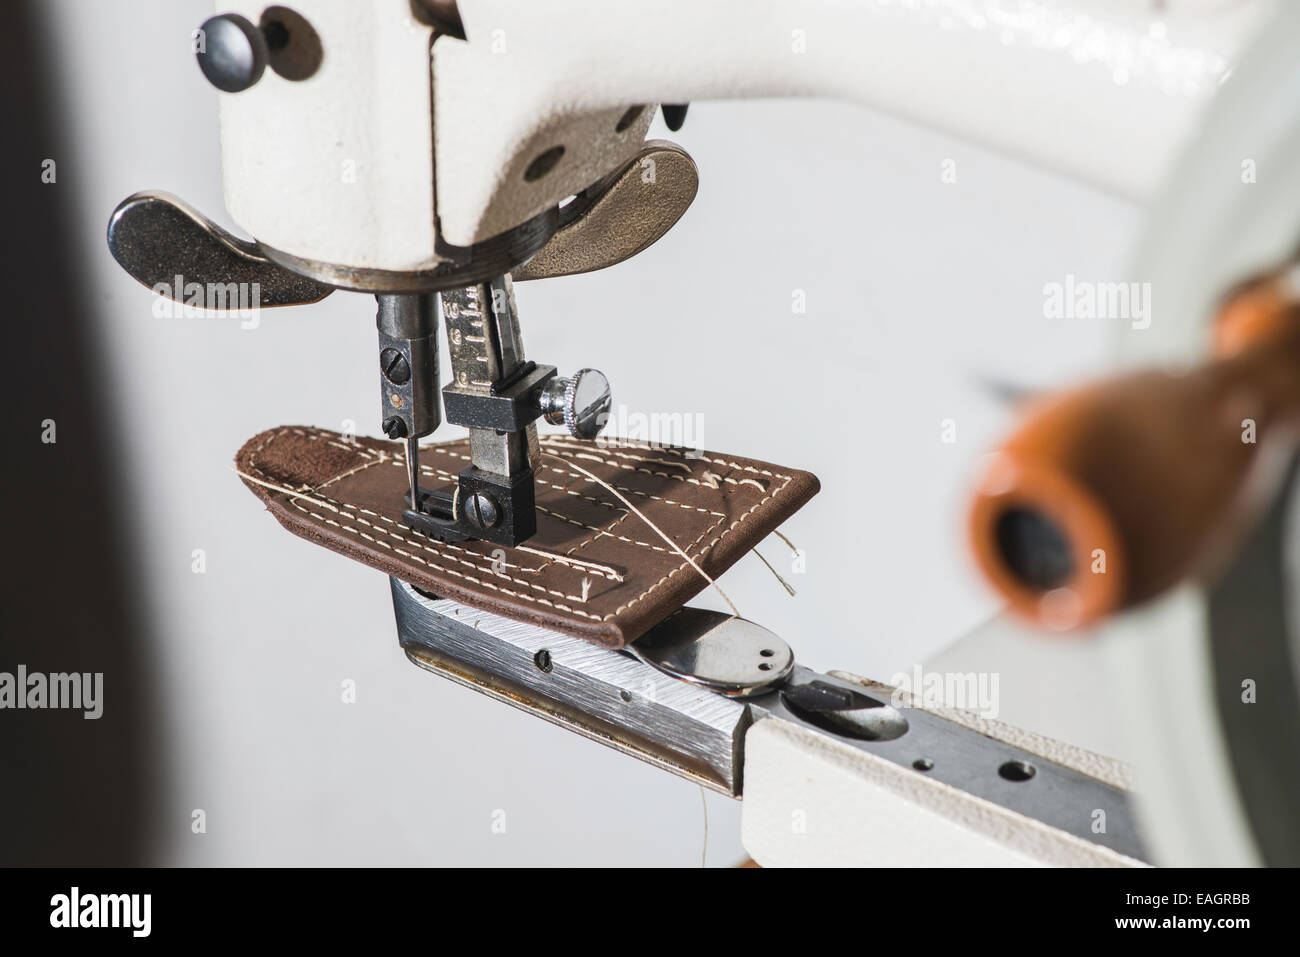 Sewing leather. Manual machine Stock Photo